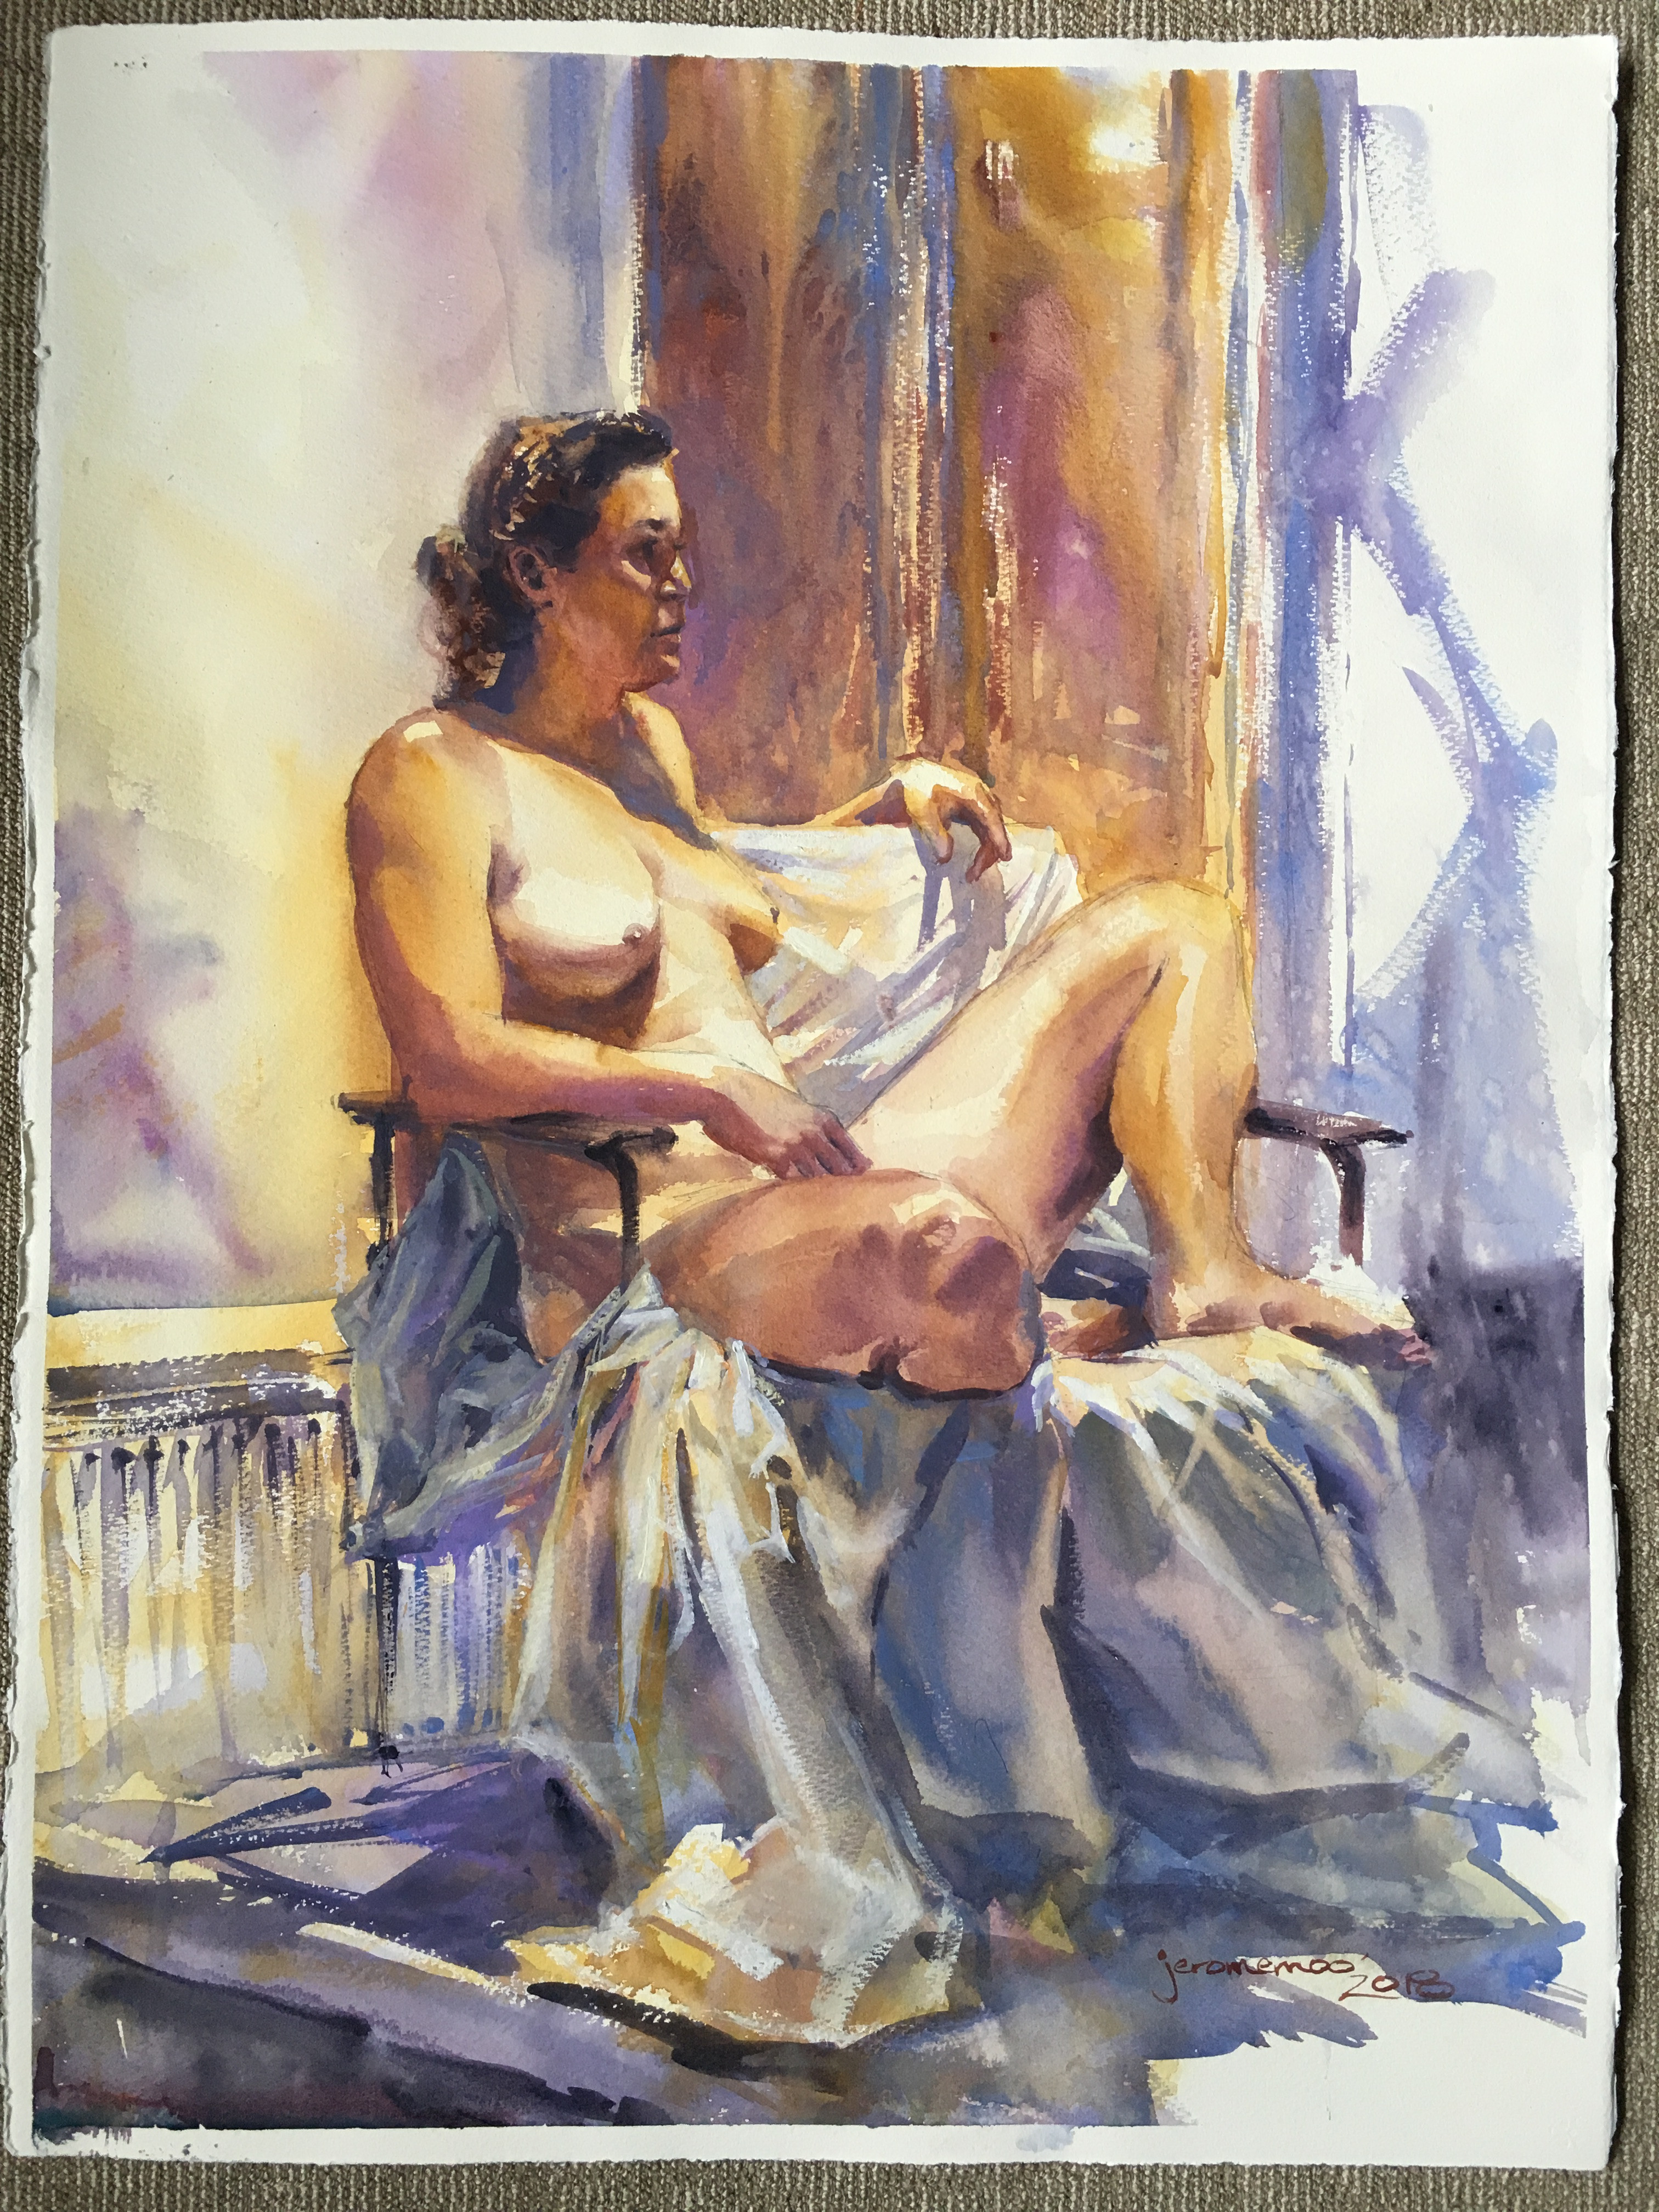 Long Pose Life Drawing of Virginia.
Watercolour on 56x76cm 425gsm Rough Saunders Waterford Watercolour Paper